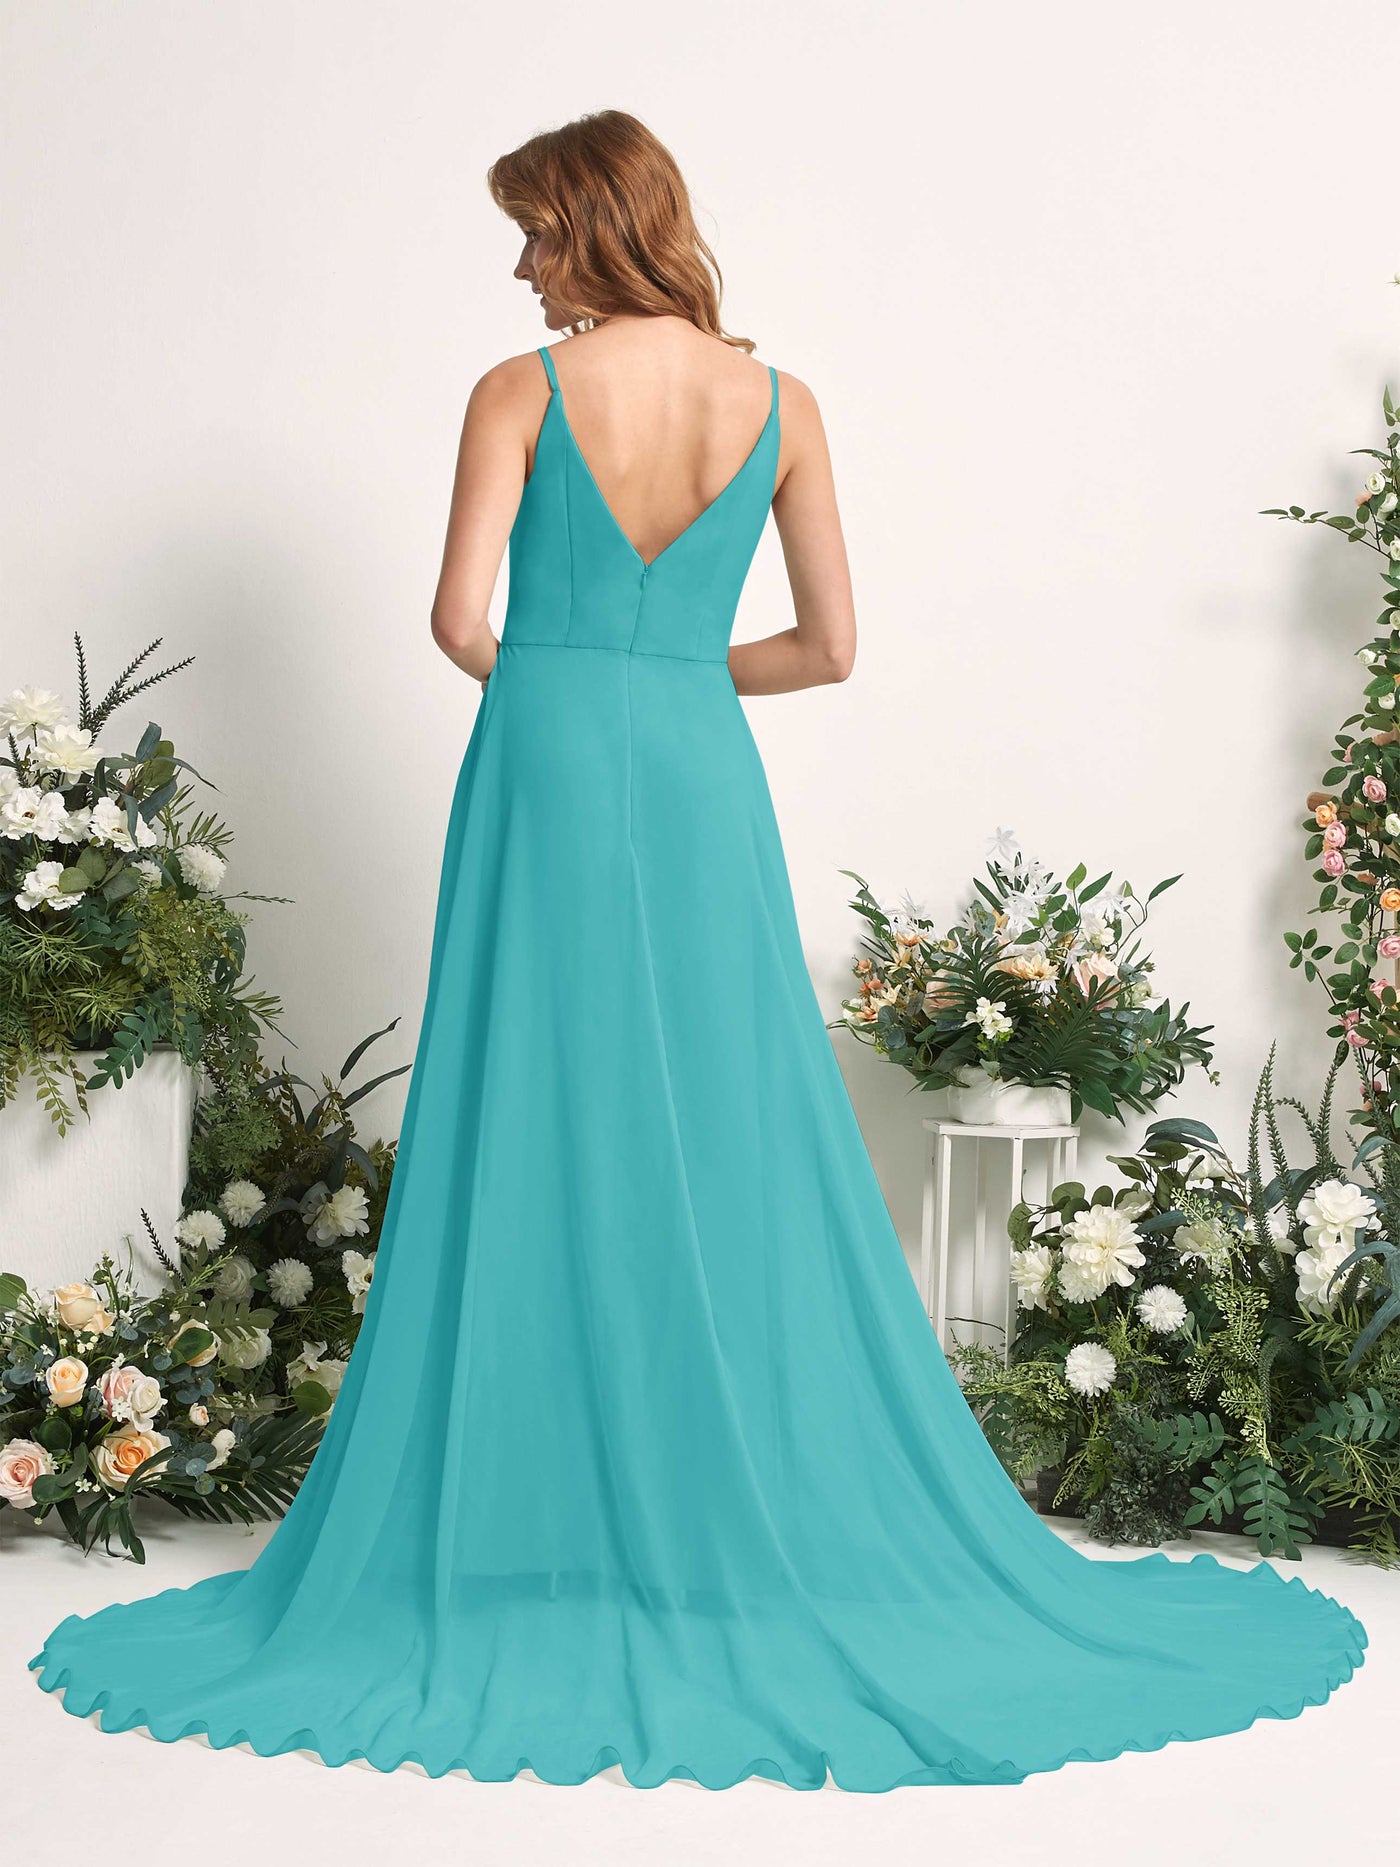 Bridesmaid Dress A-line Chiffon Spaghetti-straps Full Length Sleeveless Wedding Party Dress - Turquoise (81227723)#color_turquoise